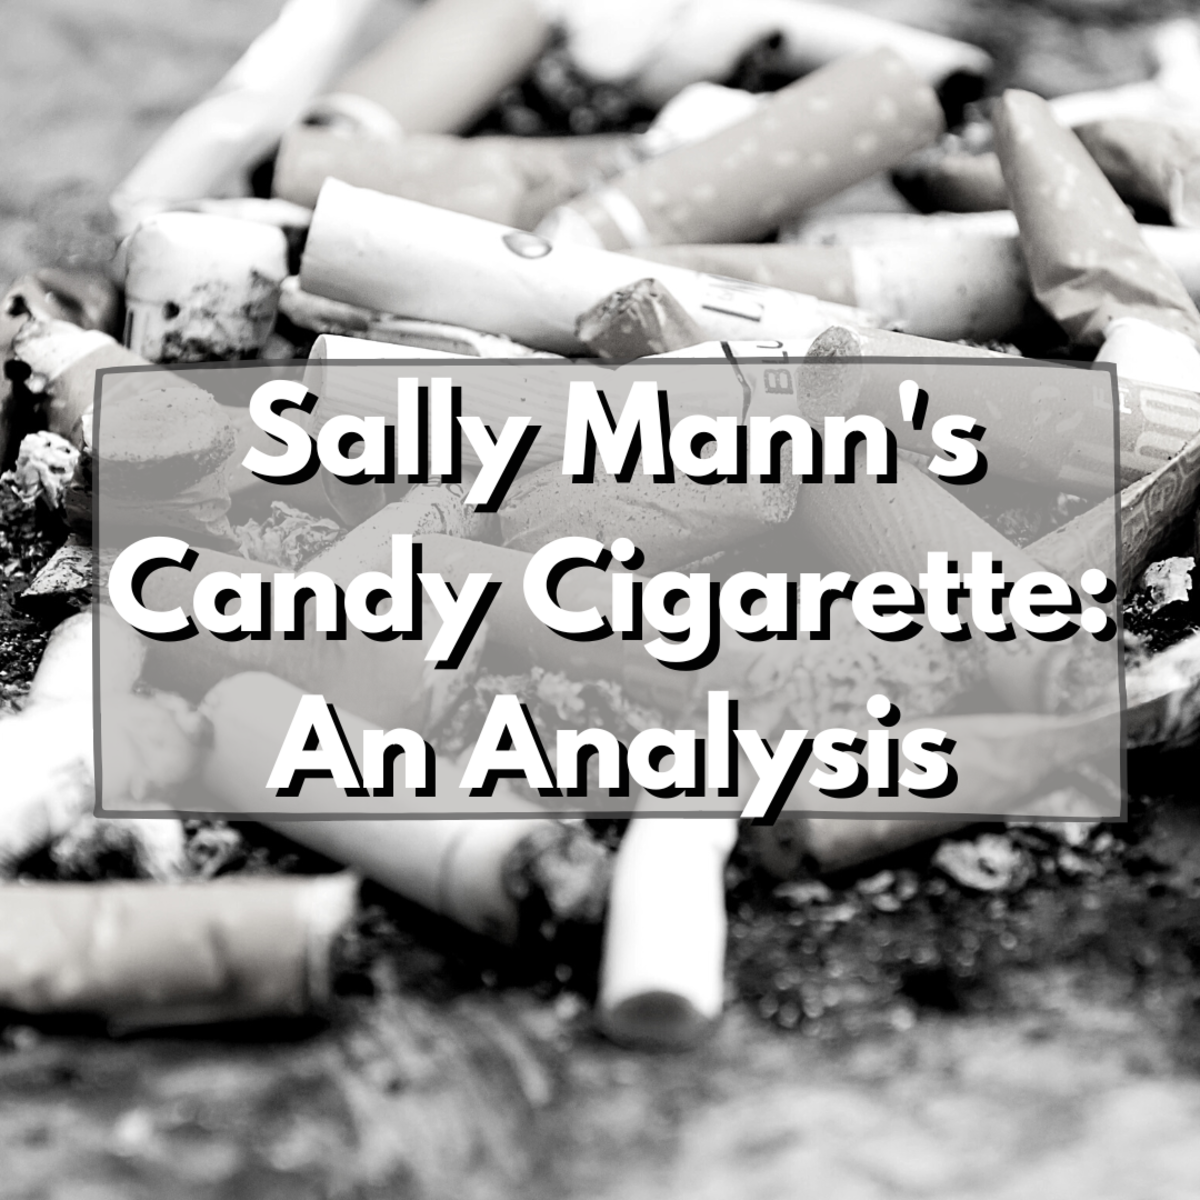 Read on for an explanation and interpretation of Sally Mann's "Candy Cigarette" photograph.